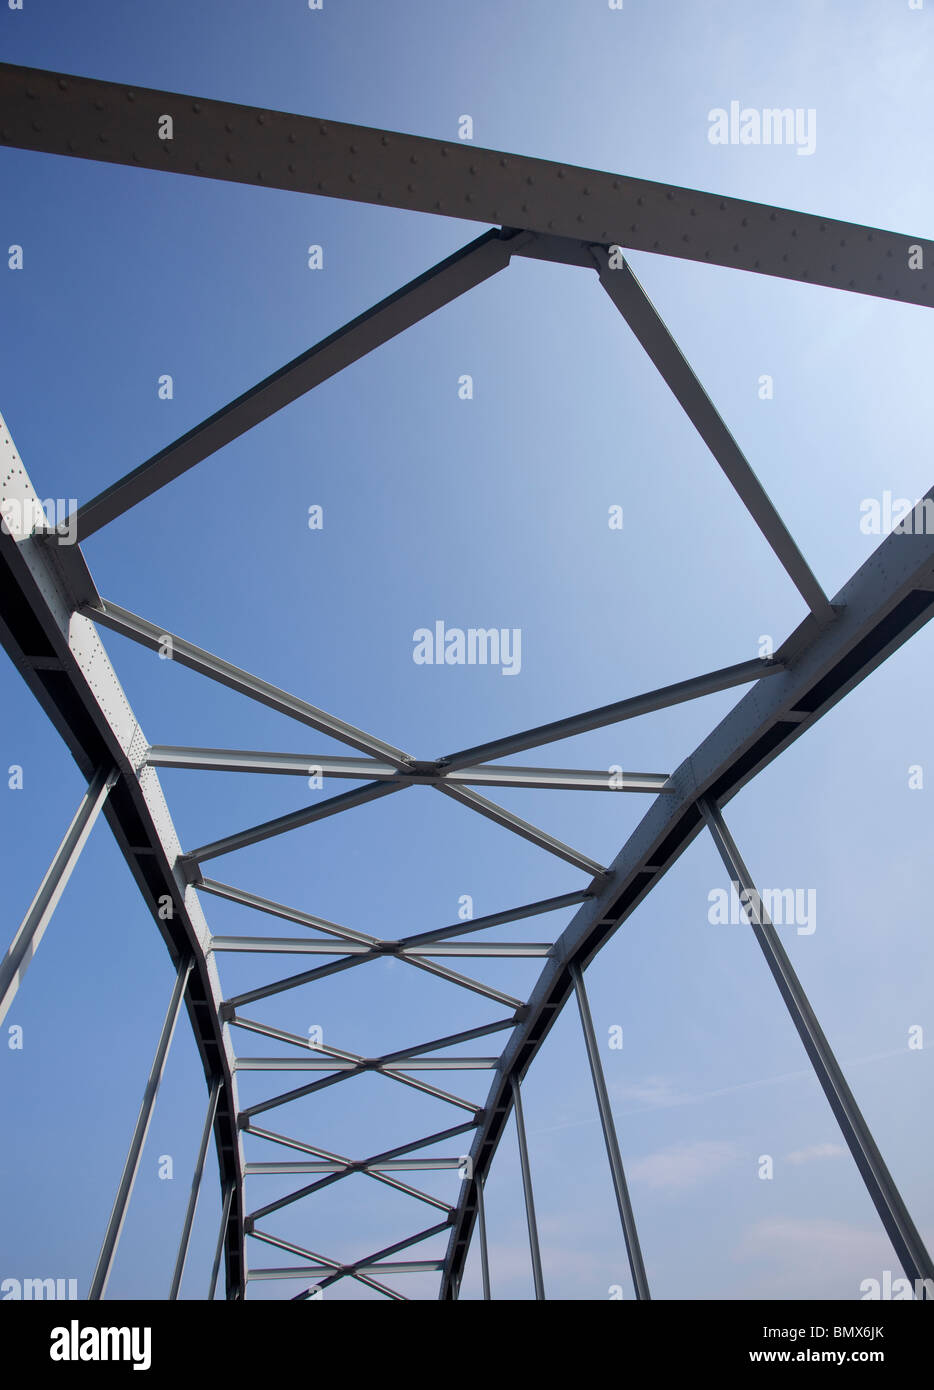 Iron bridge support structure, using riveted steel girders. Stock Photo